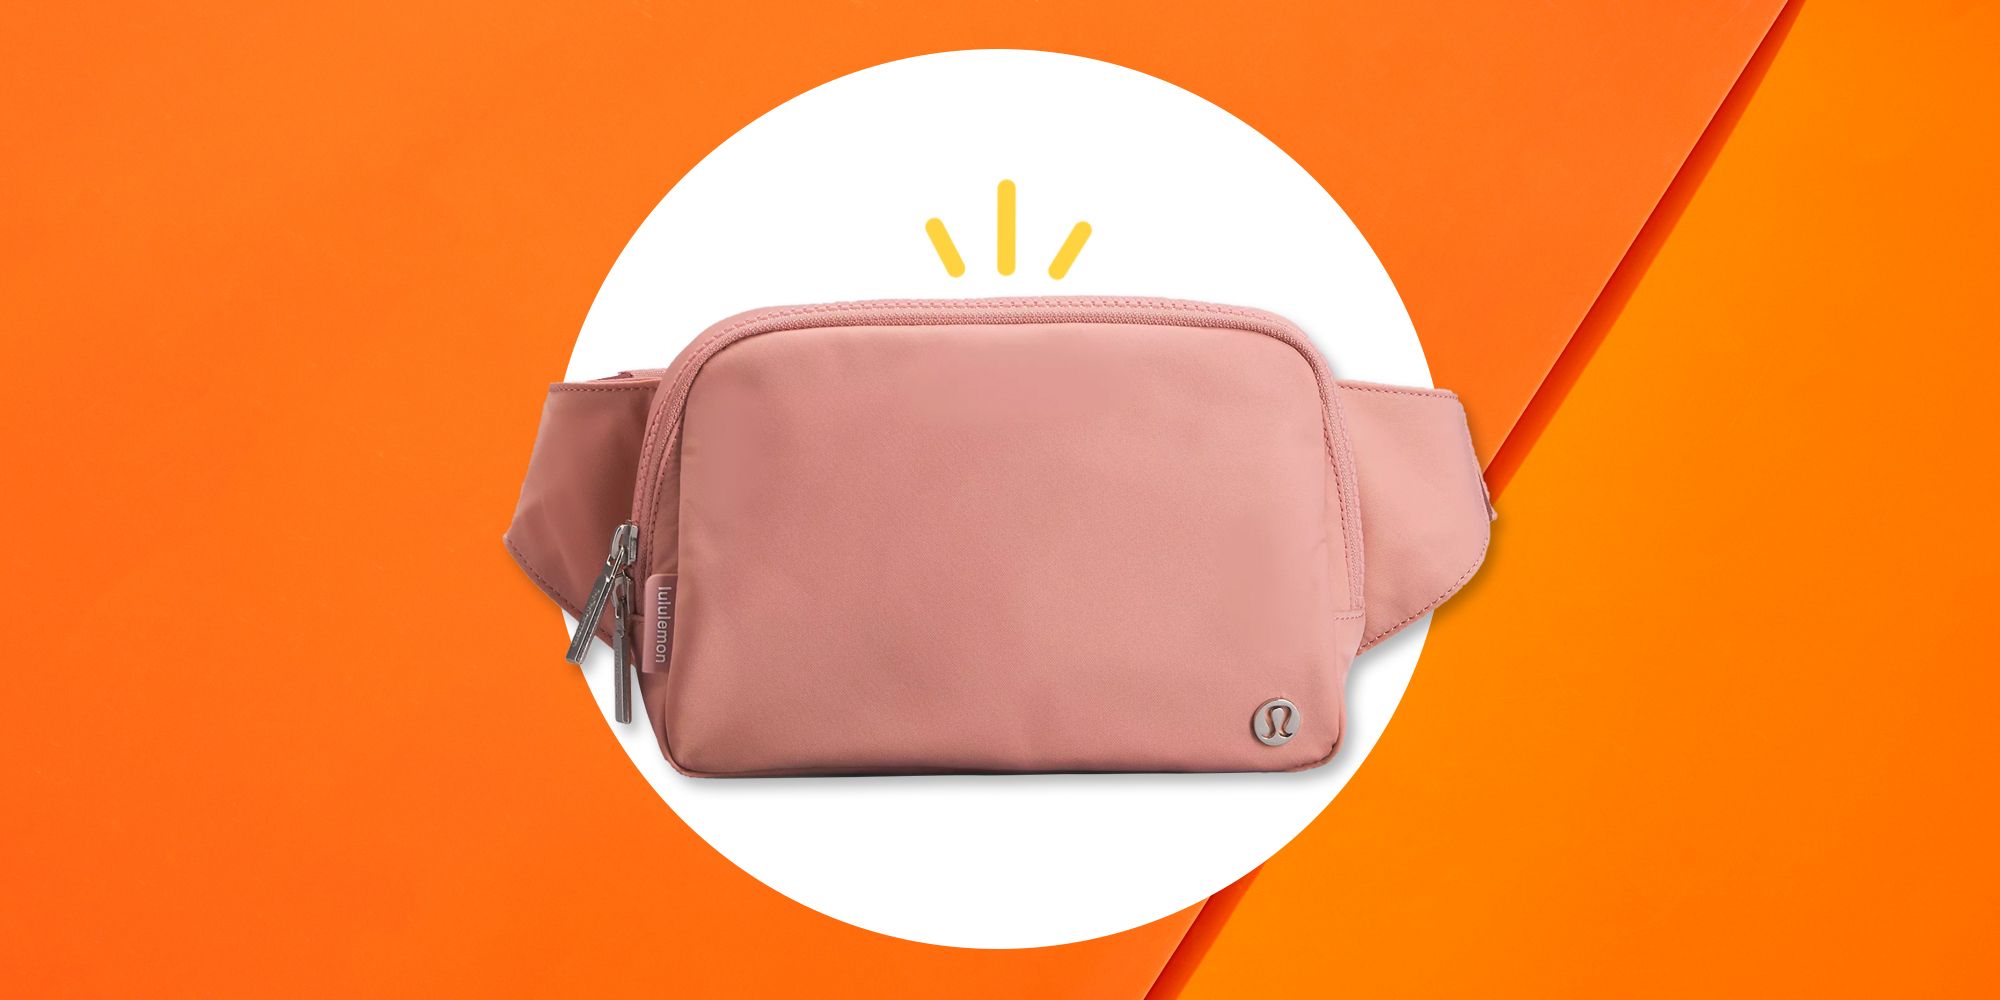 This soldout Everywhere Belt Bag from Lululemon is back in stock